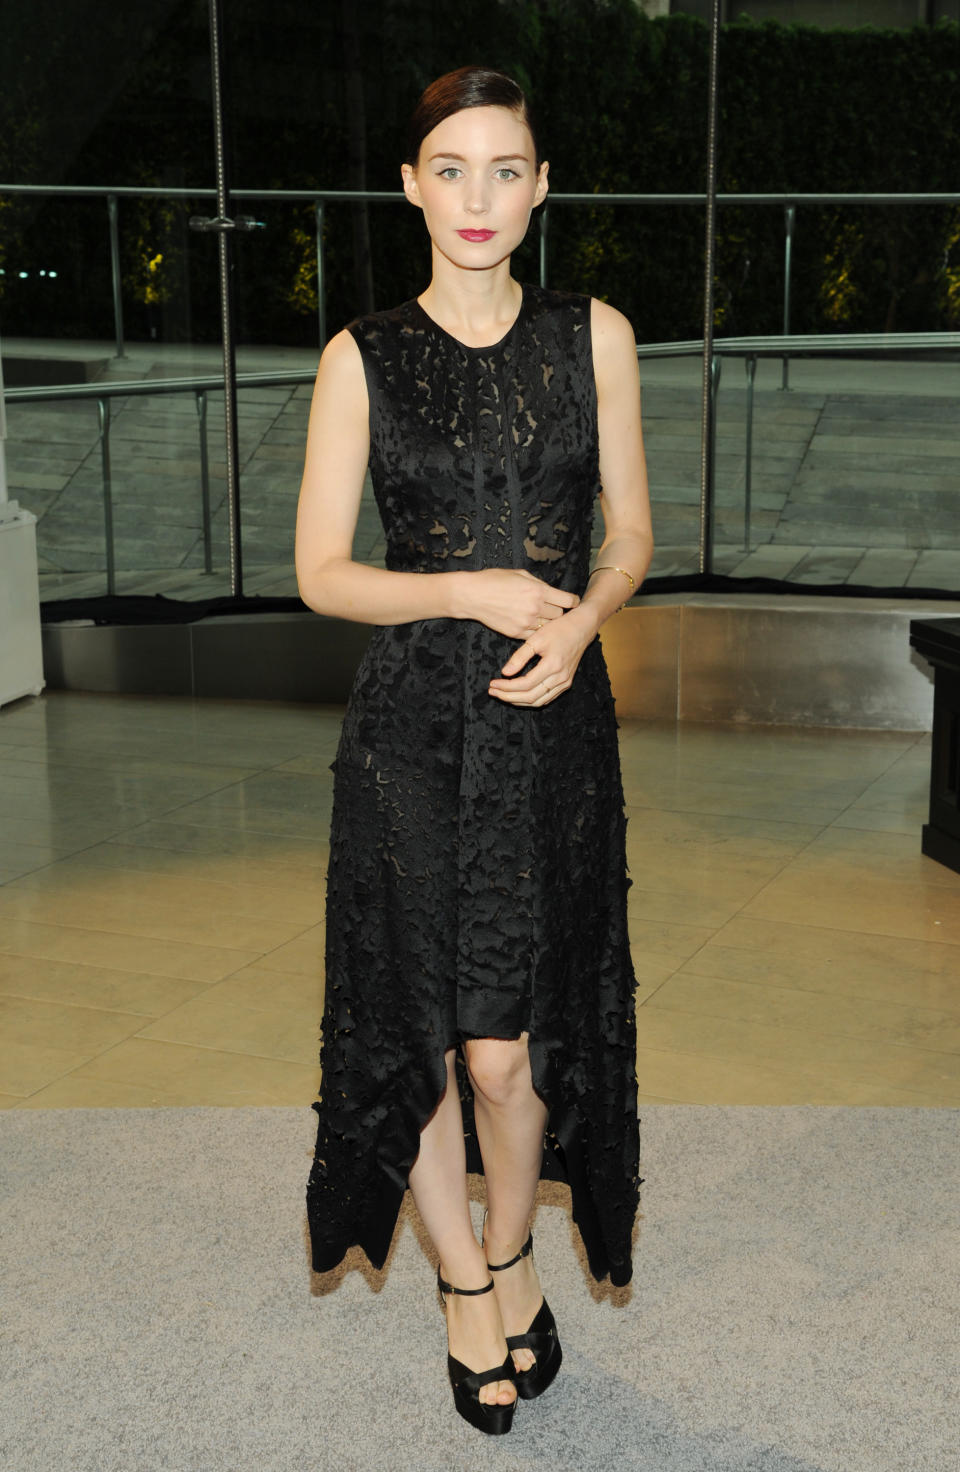 Actress Rooney Mara attends the 2013 CFDA Fashion Awards at Alice Tully Hall on Monday, June 3, 2013 in New York. (Photo by Evan Agostini/Invision/AP)